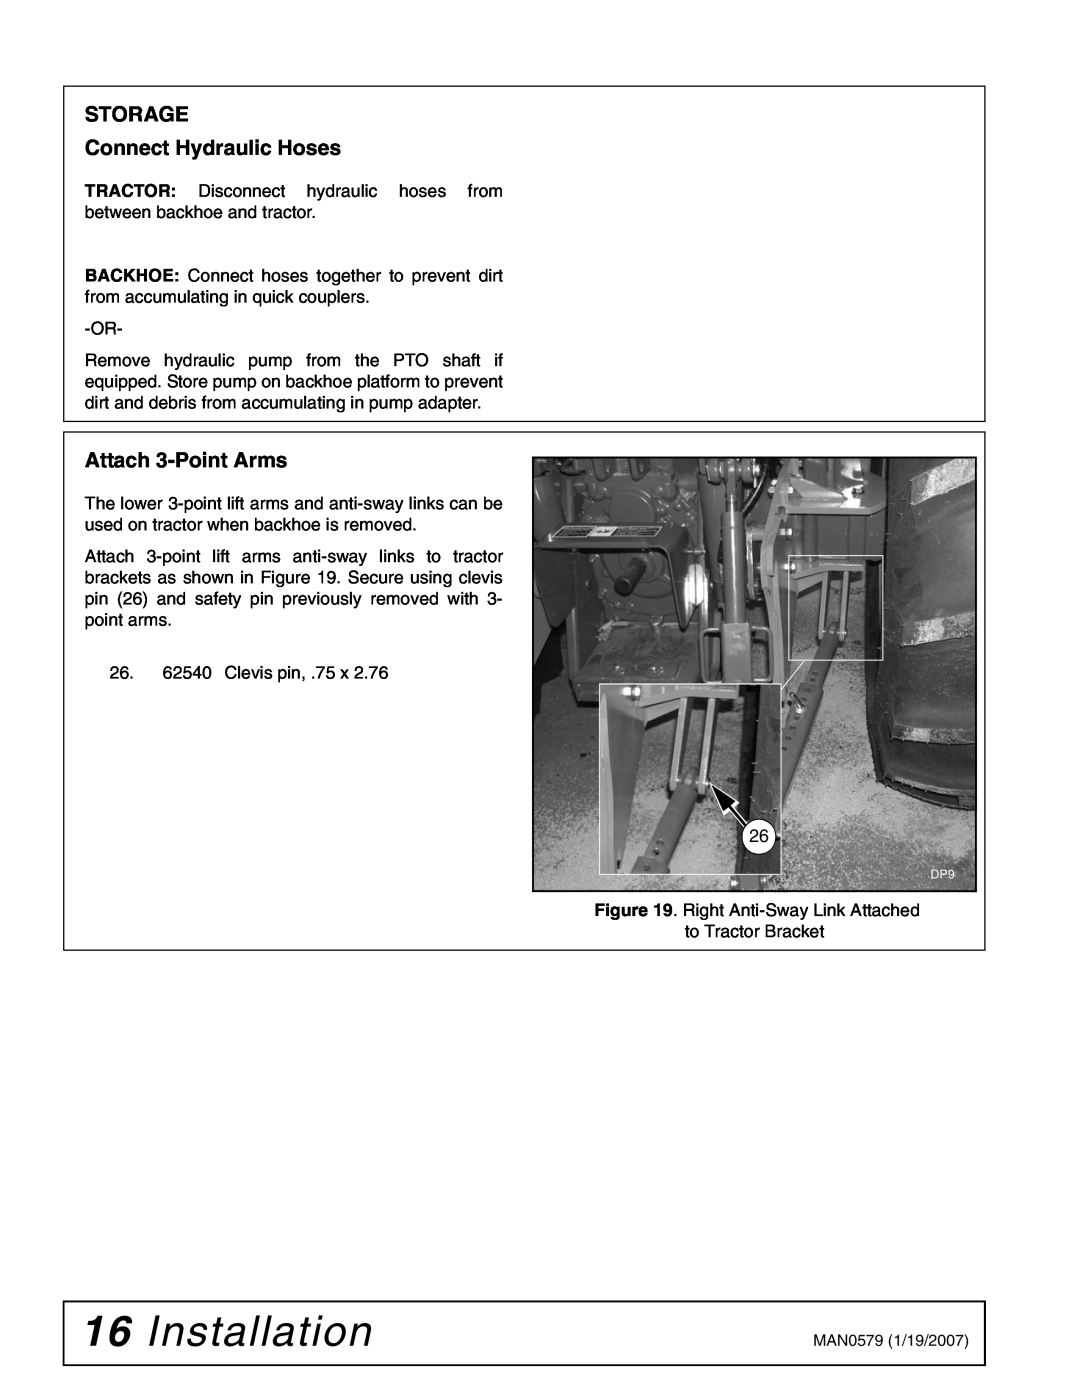 Woods Equipment 1023000 installation manual Installation, STORAGE Connect Hydraulic Hoses, Attach 3-Point Arms 